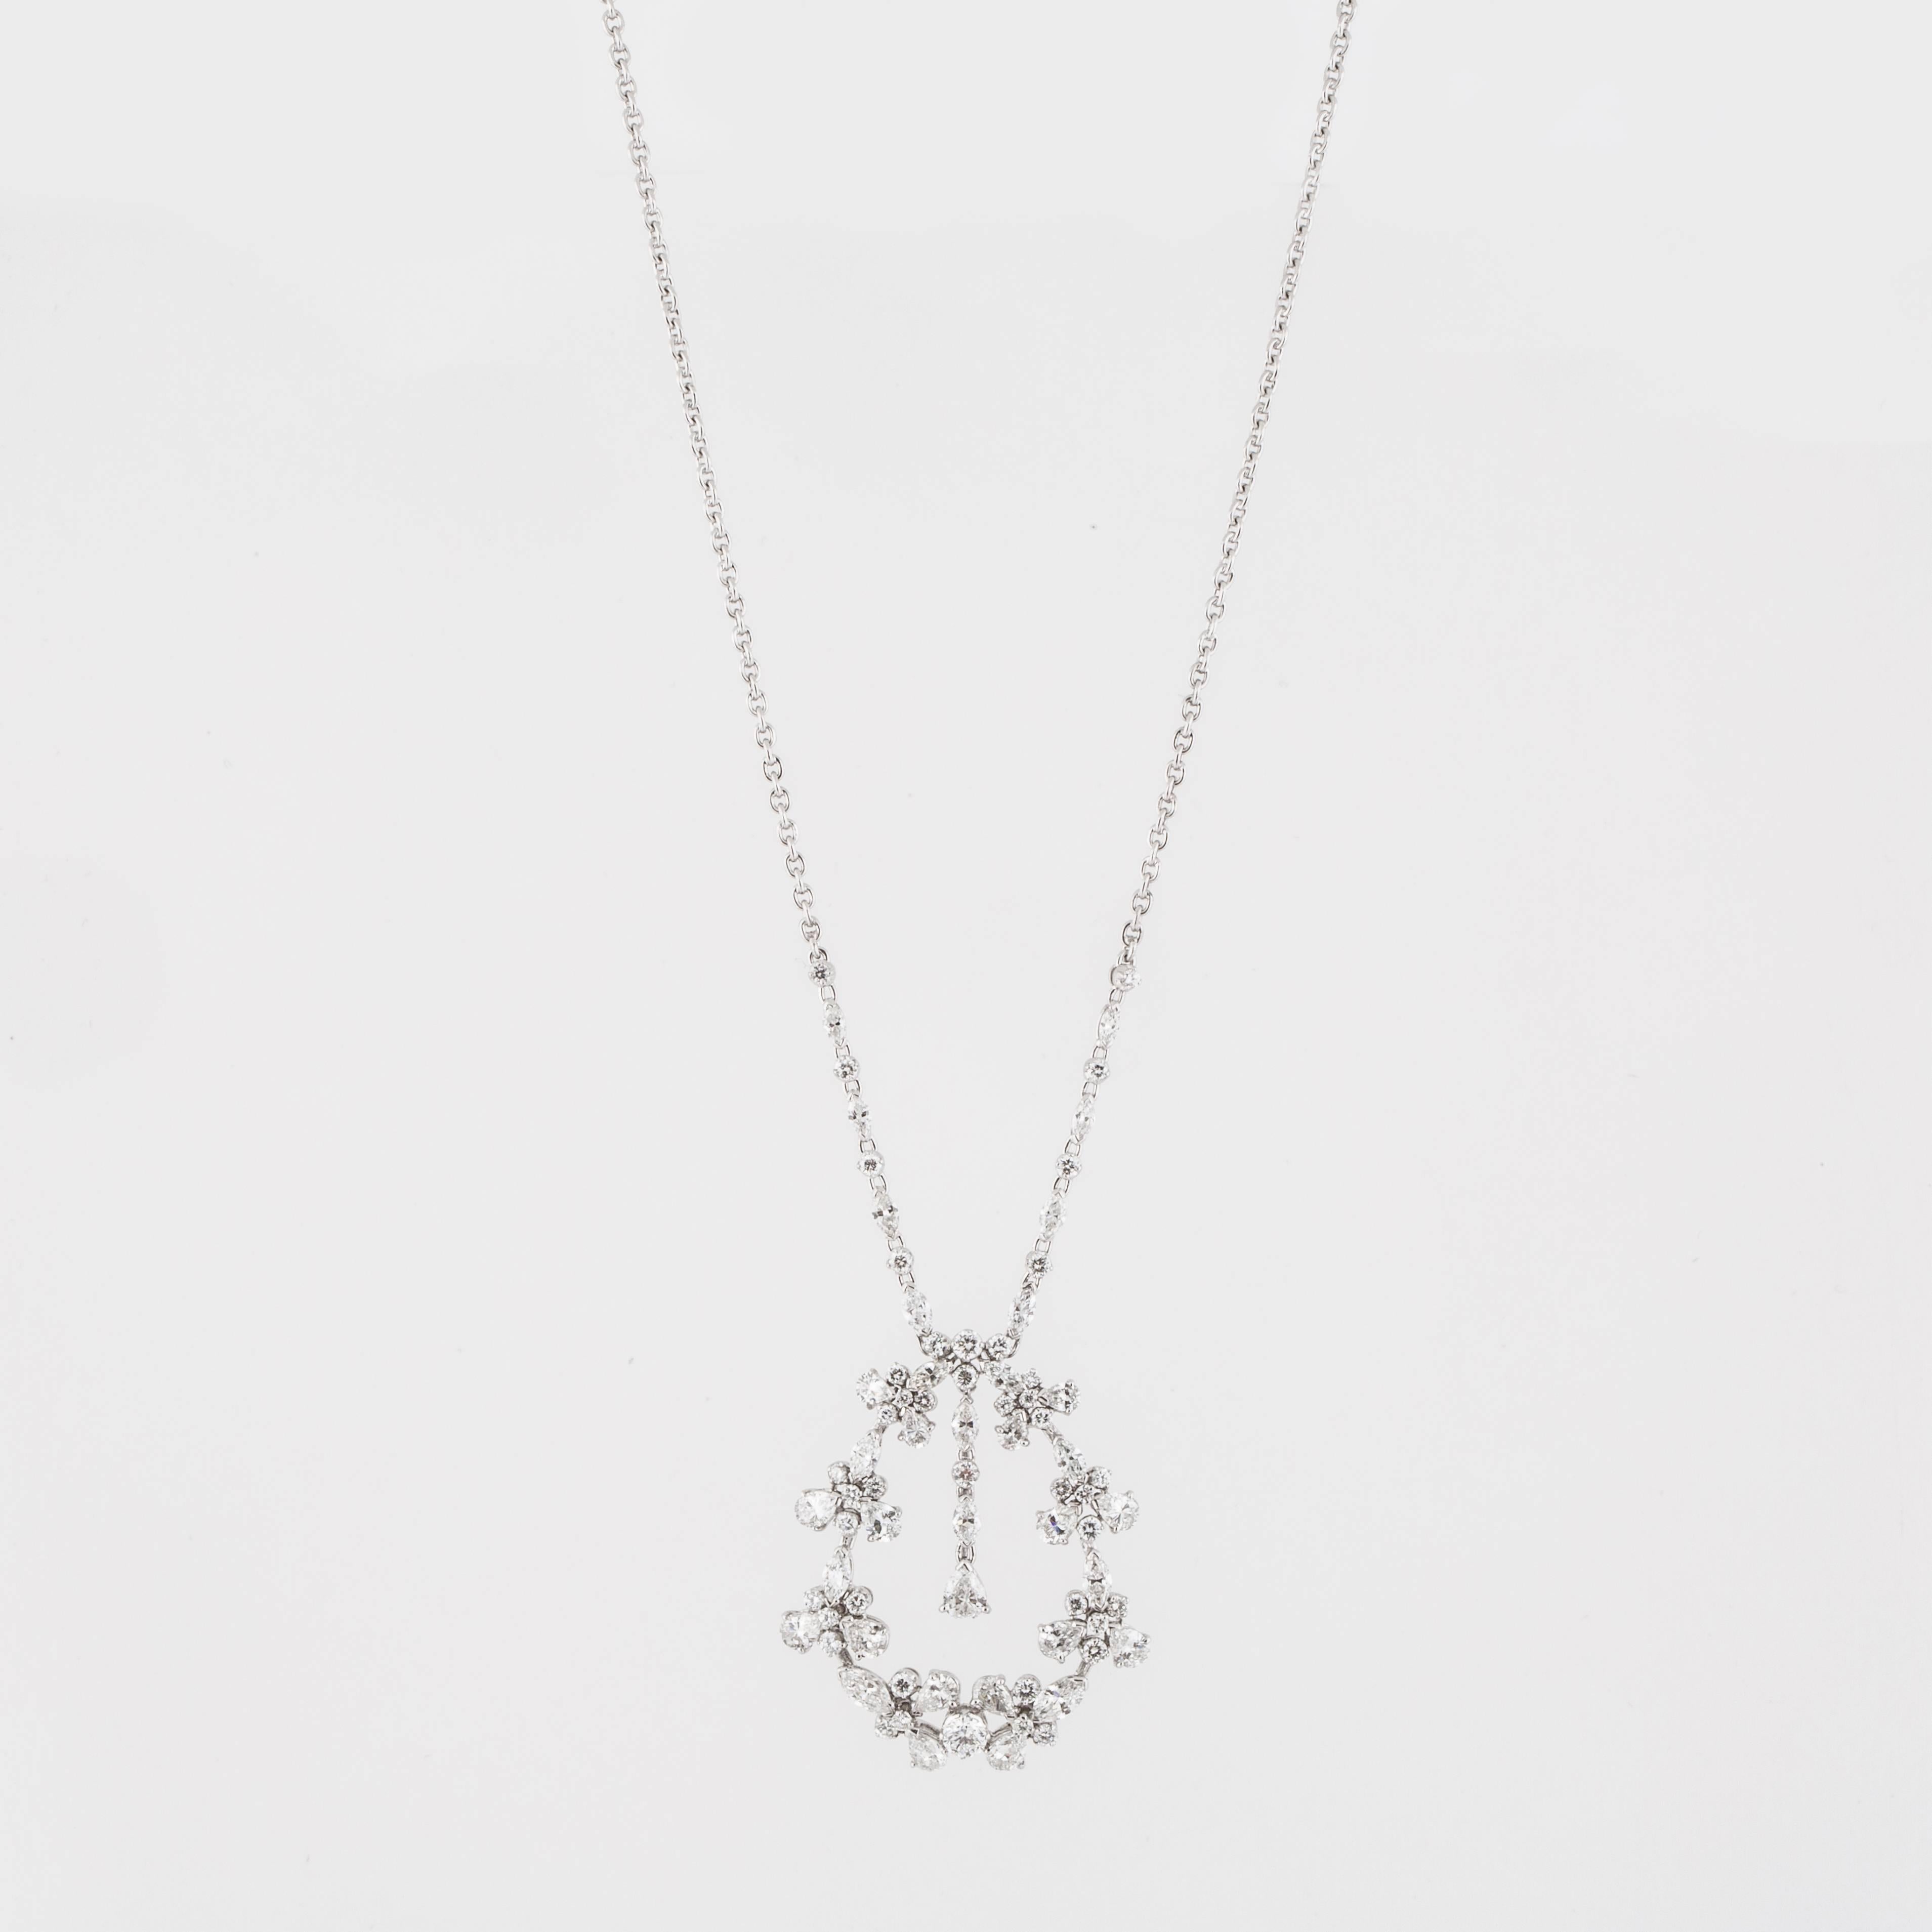 Mixed Cut Diamond Drop Pendant Necklace in 18K White Gold